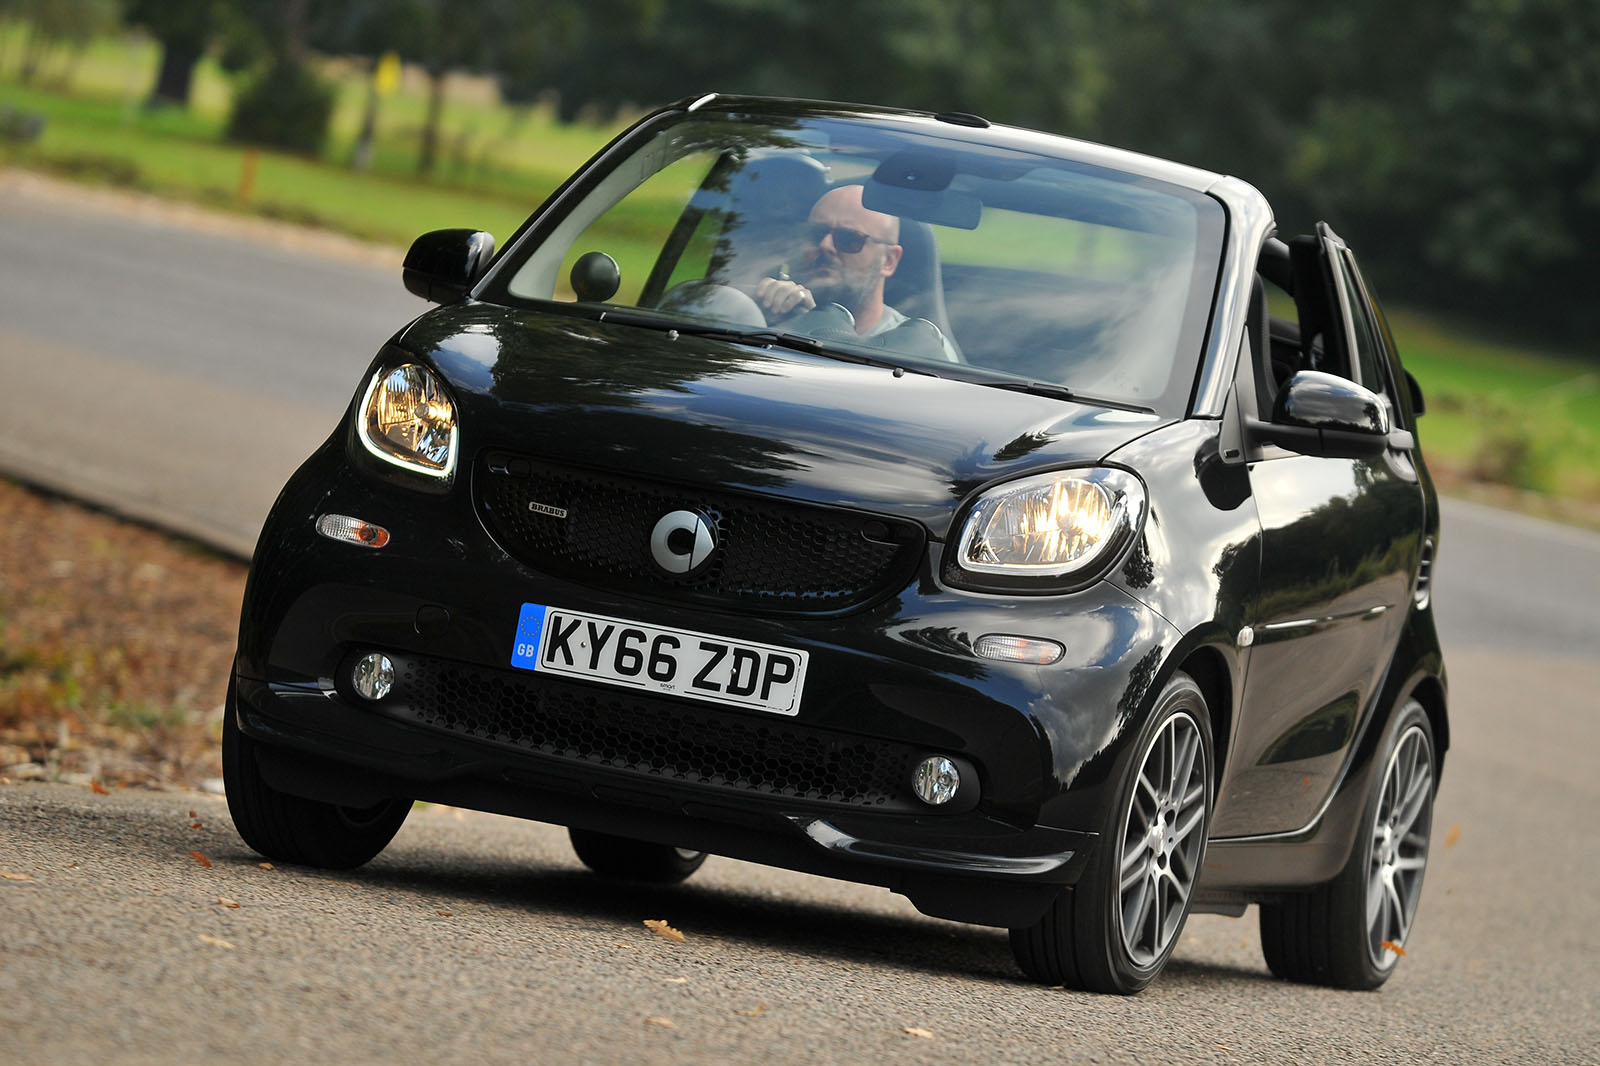 https://www.autocar.co.uk/sites/autocar.co.uk/files/images/car-reviews/first-drives/legacy/smart-fortwo-brabus-05.jpg